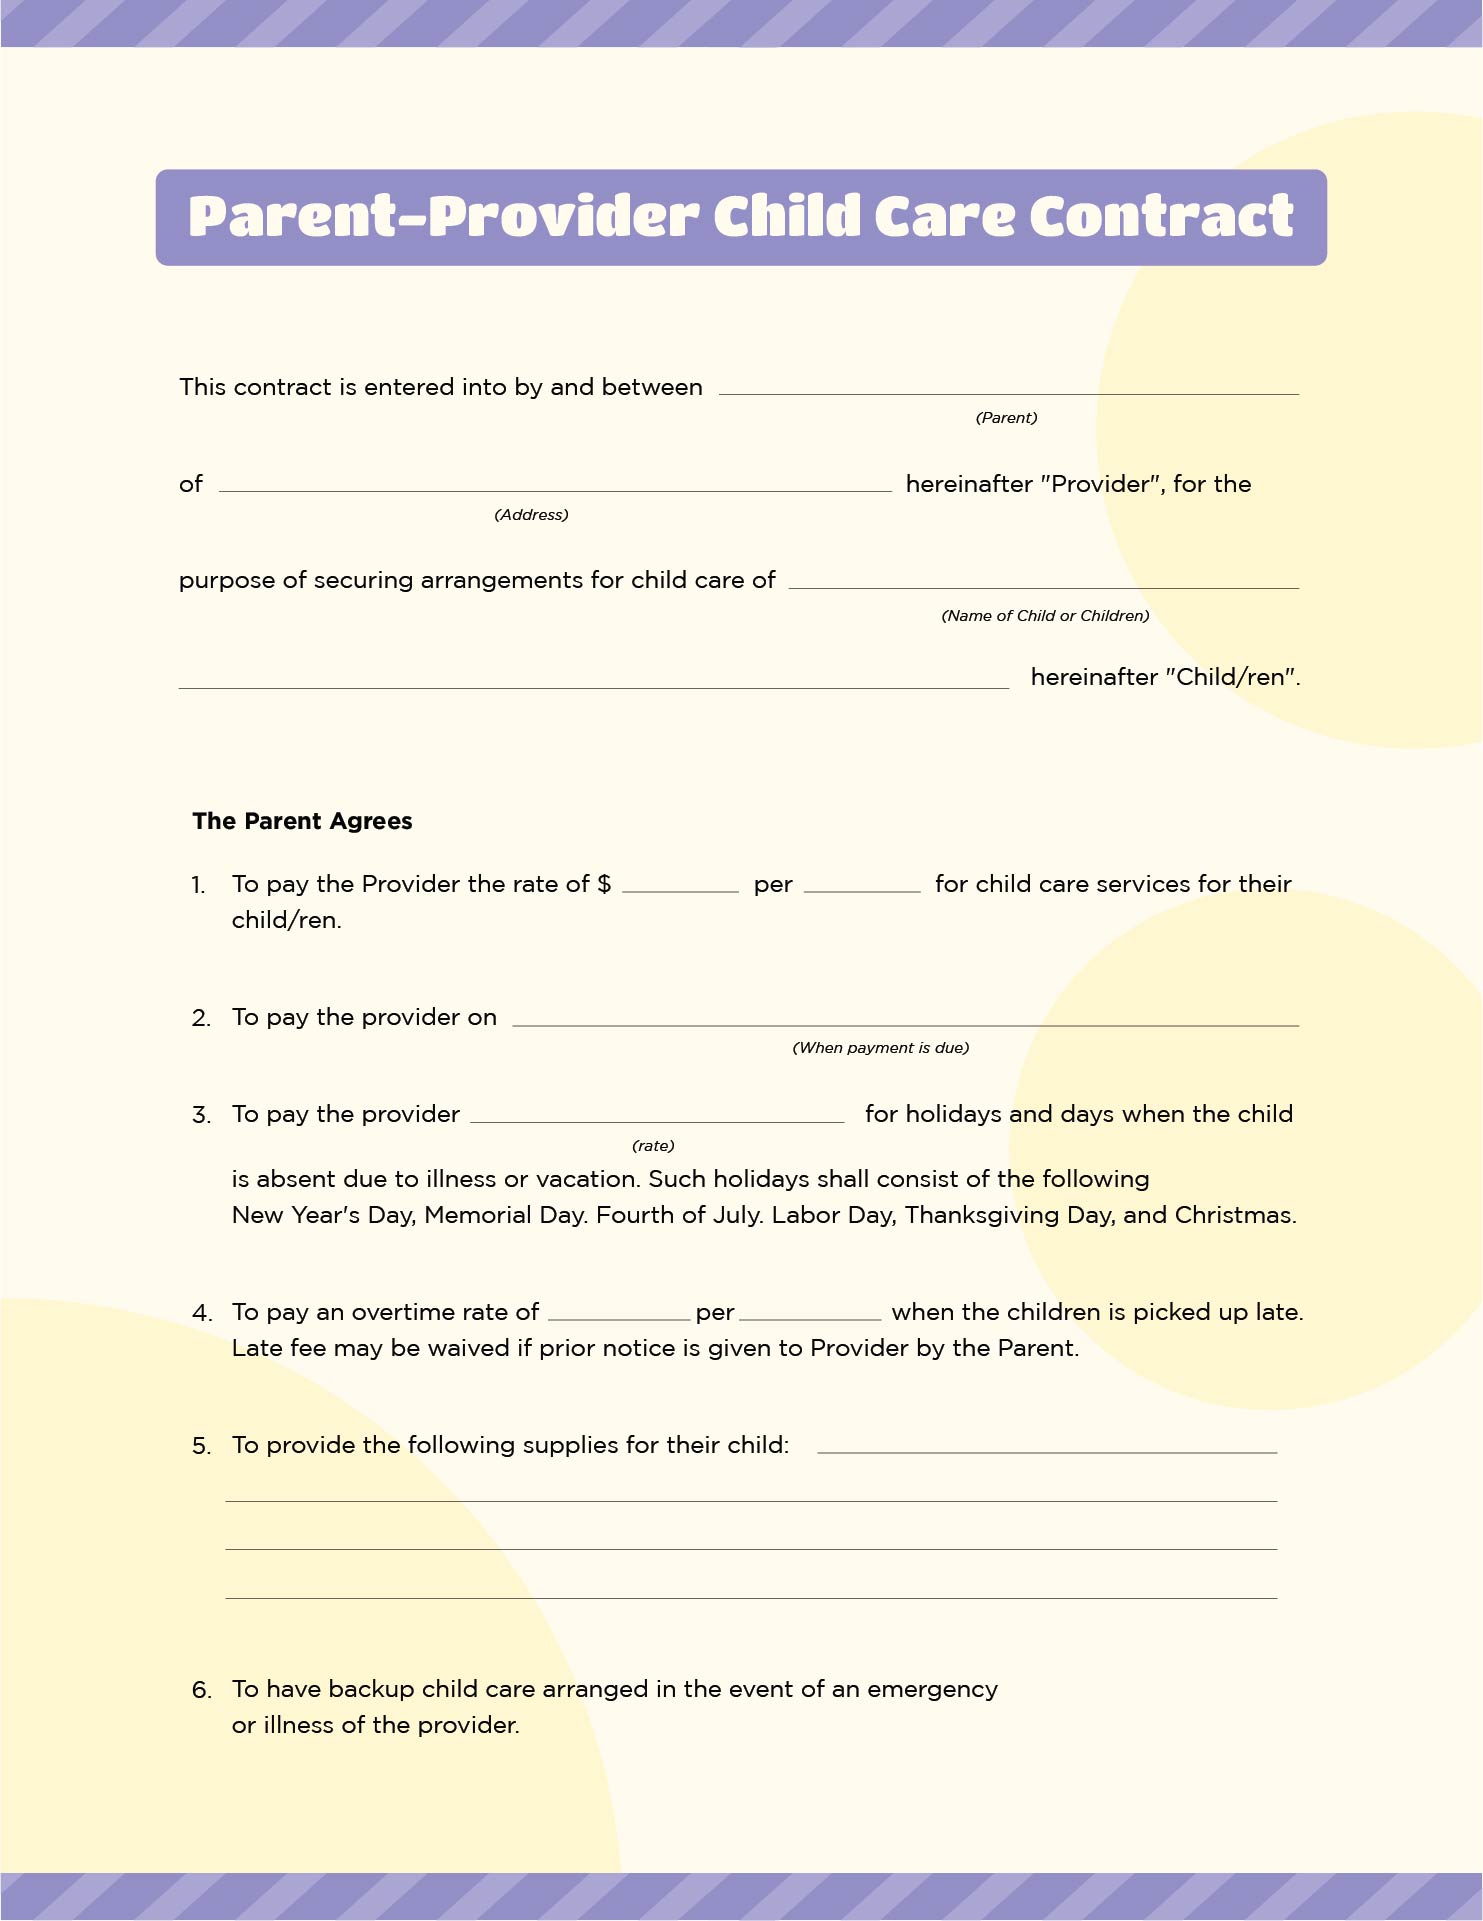 8-best-images-of-home-day-care-forms-printable-free-daycare-contract-forms-free-printable